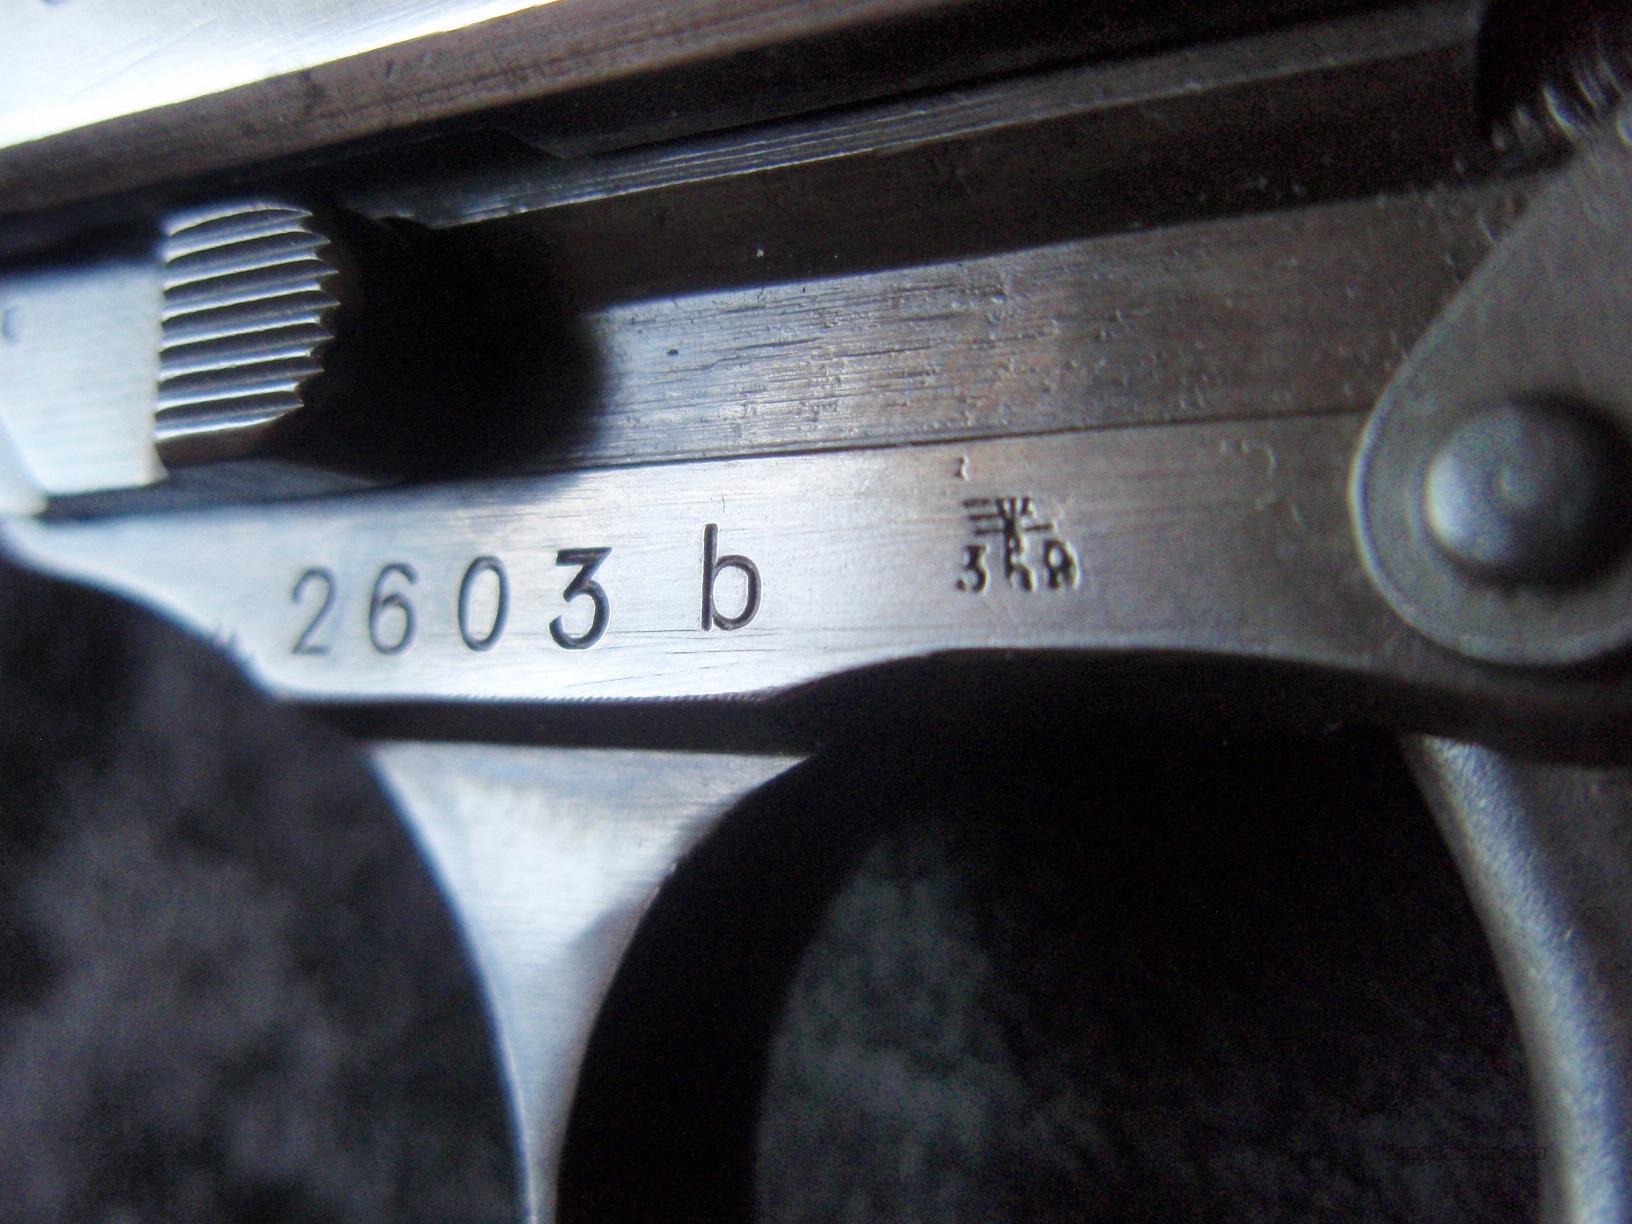 walther serial number chart